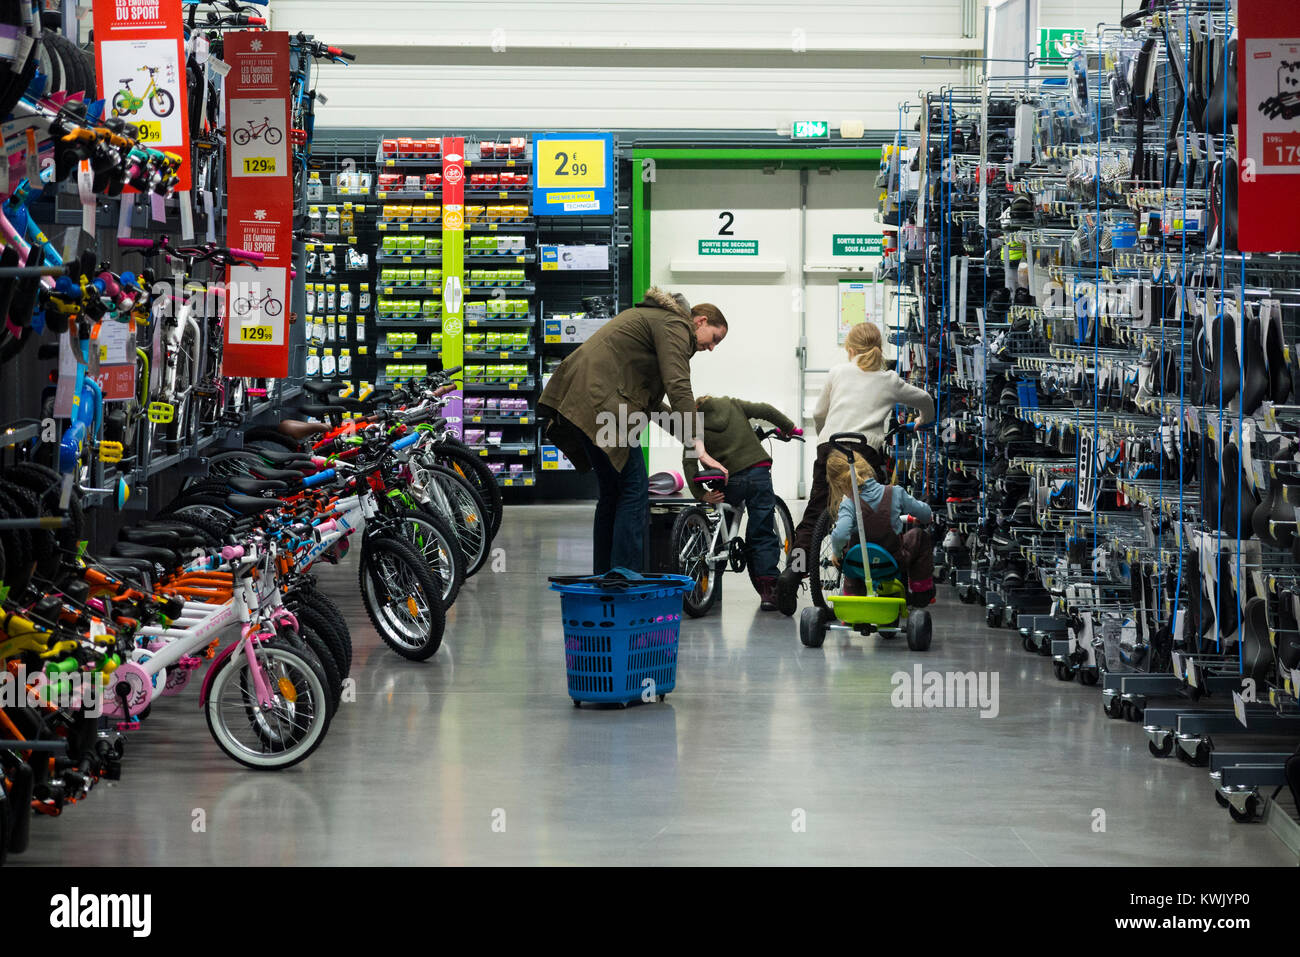 Children ride new bikes on sale in Decathlon store / shop / sports  equipment retailer in France / French superstore at Grésy-sur-Aix. France.  (93 Stock Photo - Alamy